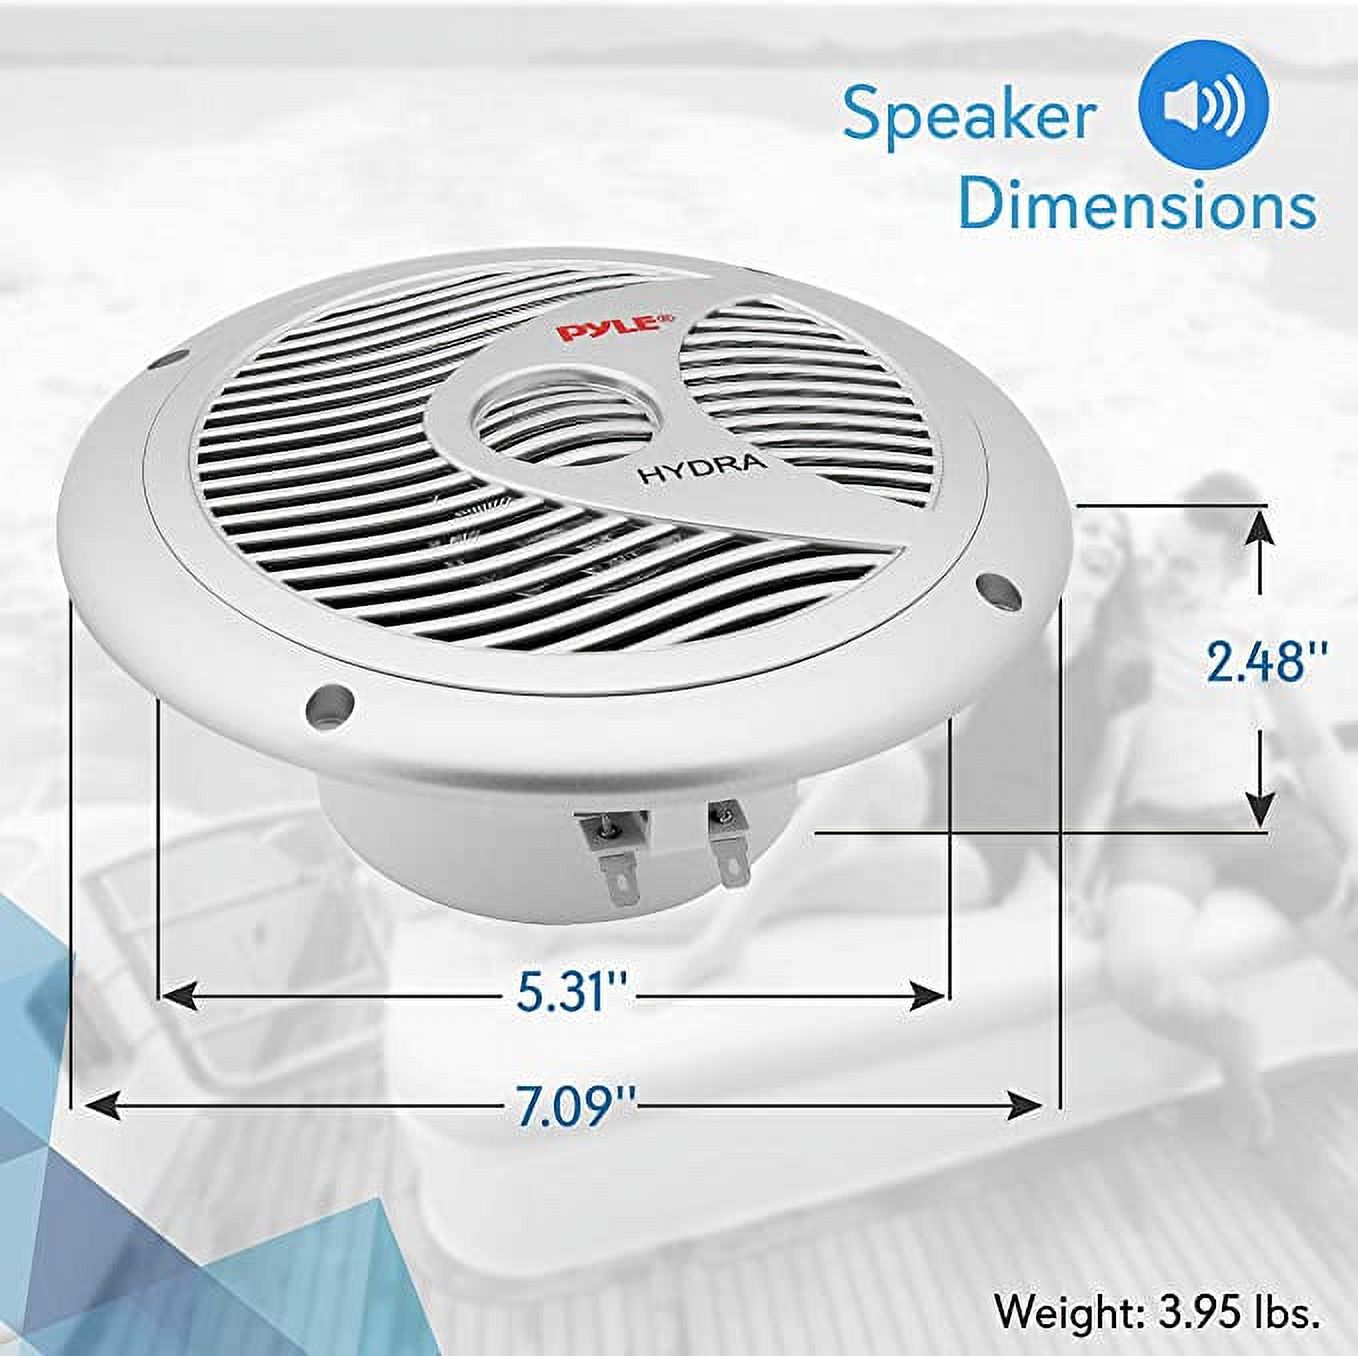 Pyle 6.5” Dual Marine Speaker 2Way Waterproof & Weather Resistant Outdoor Audio Stereo Sound System - image 5 of 7